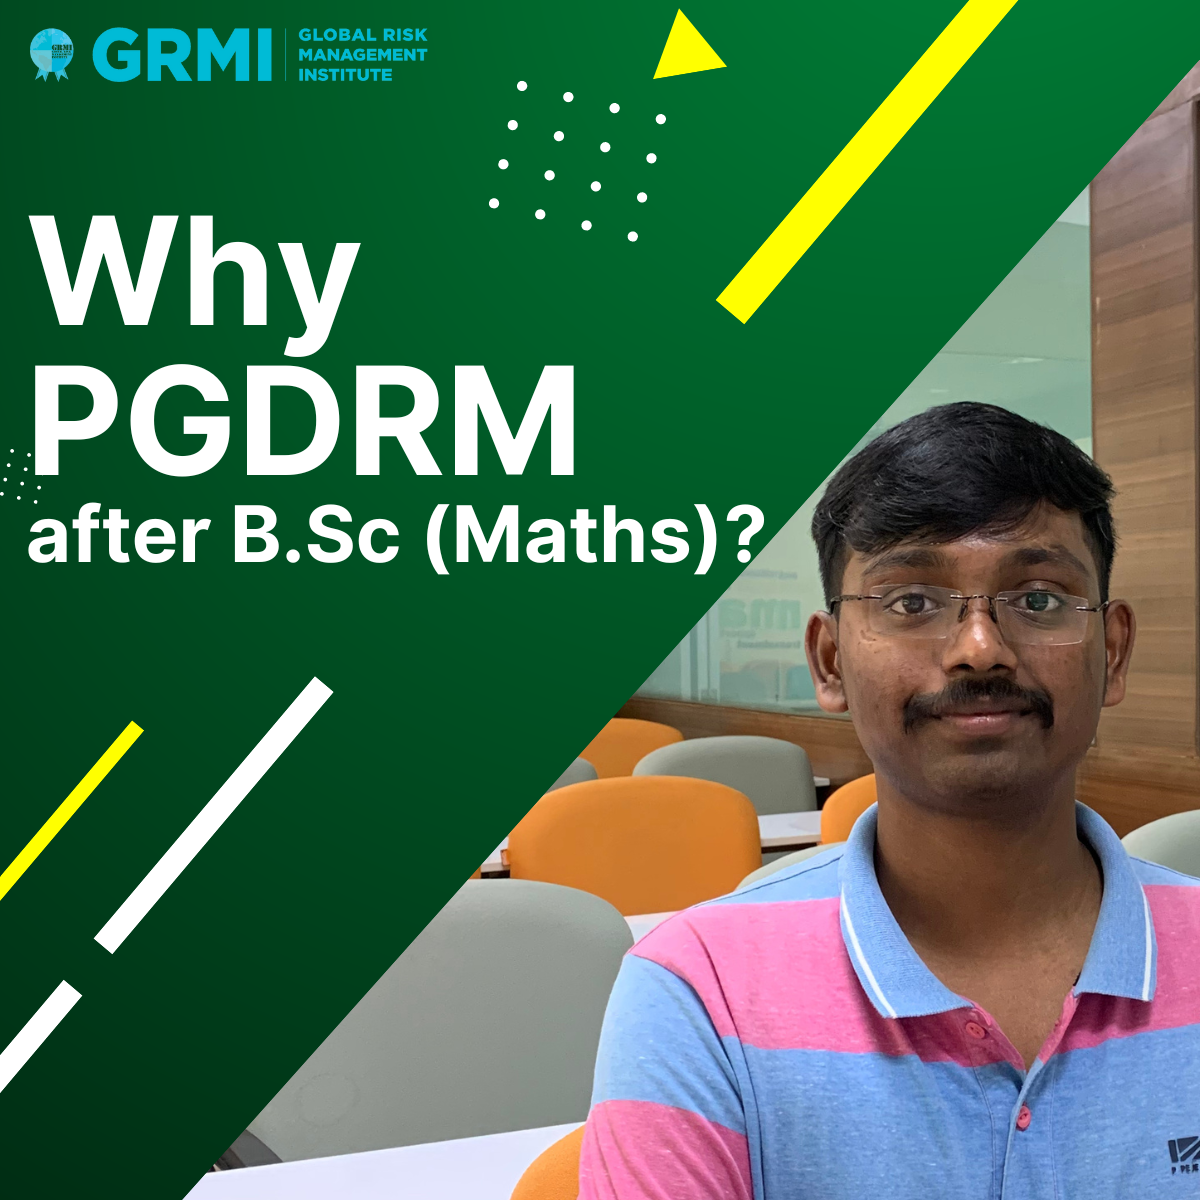 WHY PGDRM AFTER B.Sc (Maths) Cover